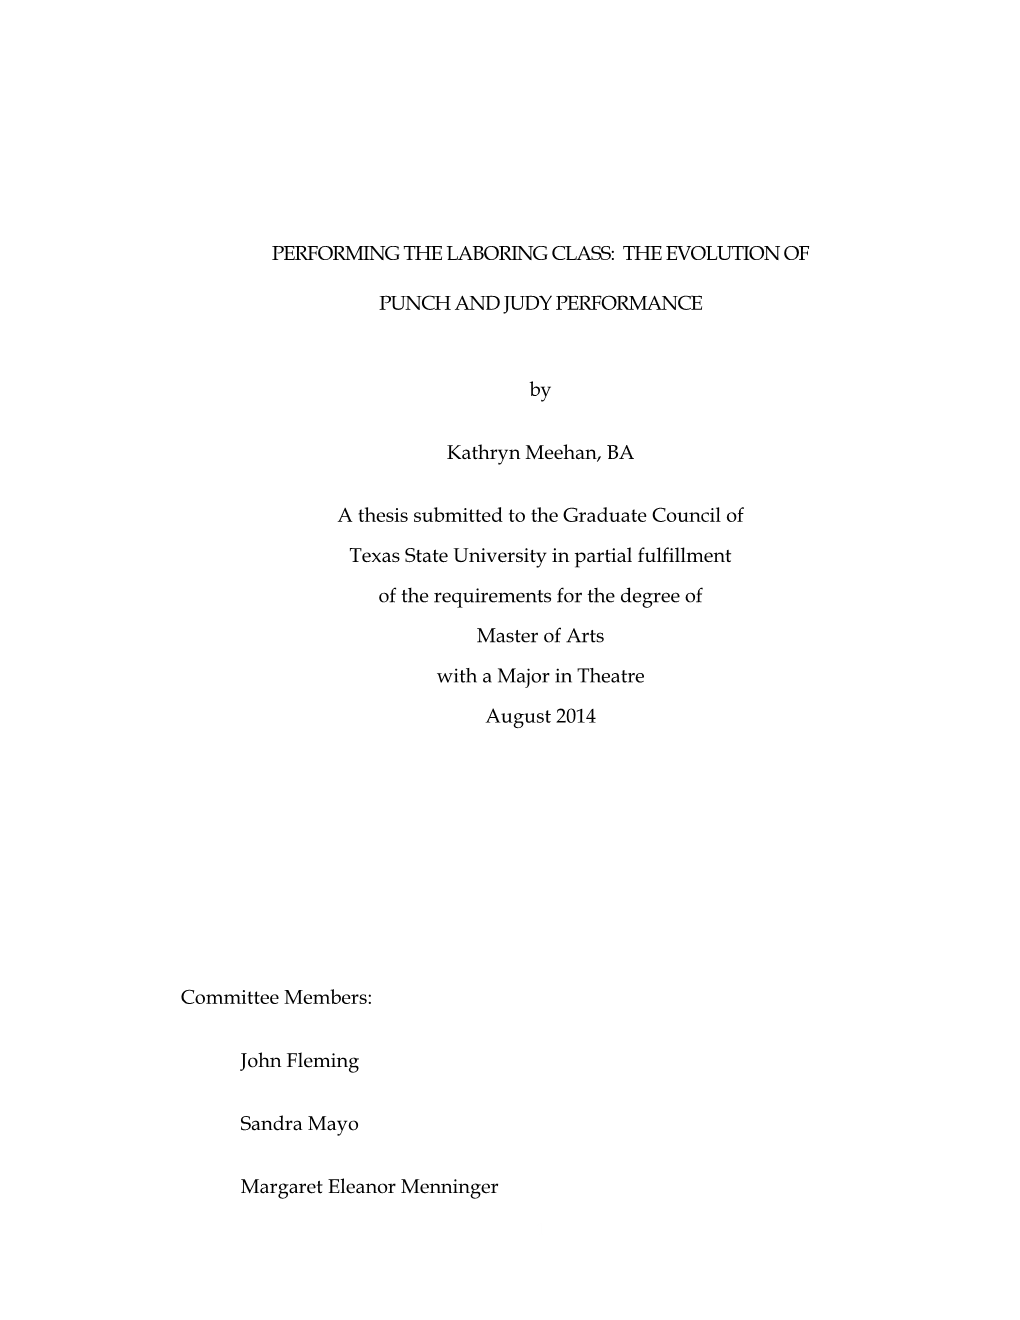 PERFORMING the LABORING CLASS: the EVOLUTION of PUNCH and JUDY PERFORMANCE by Kathryn Meehan, BA a Thesis Submitted to The